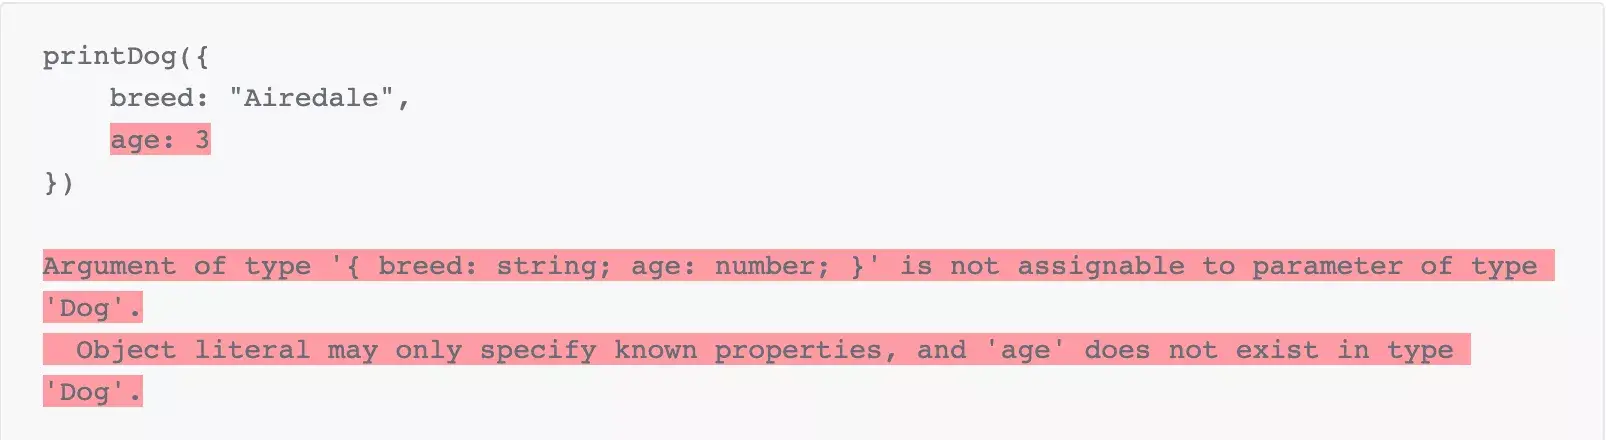 Object literal may only specify known properties, and 'age' does not exist in type 'Dog'.